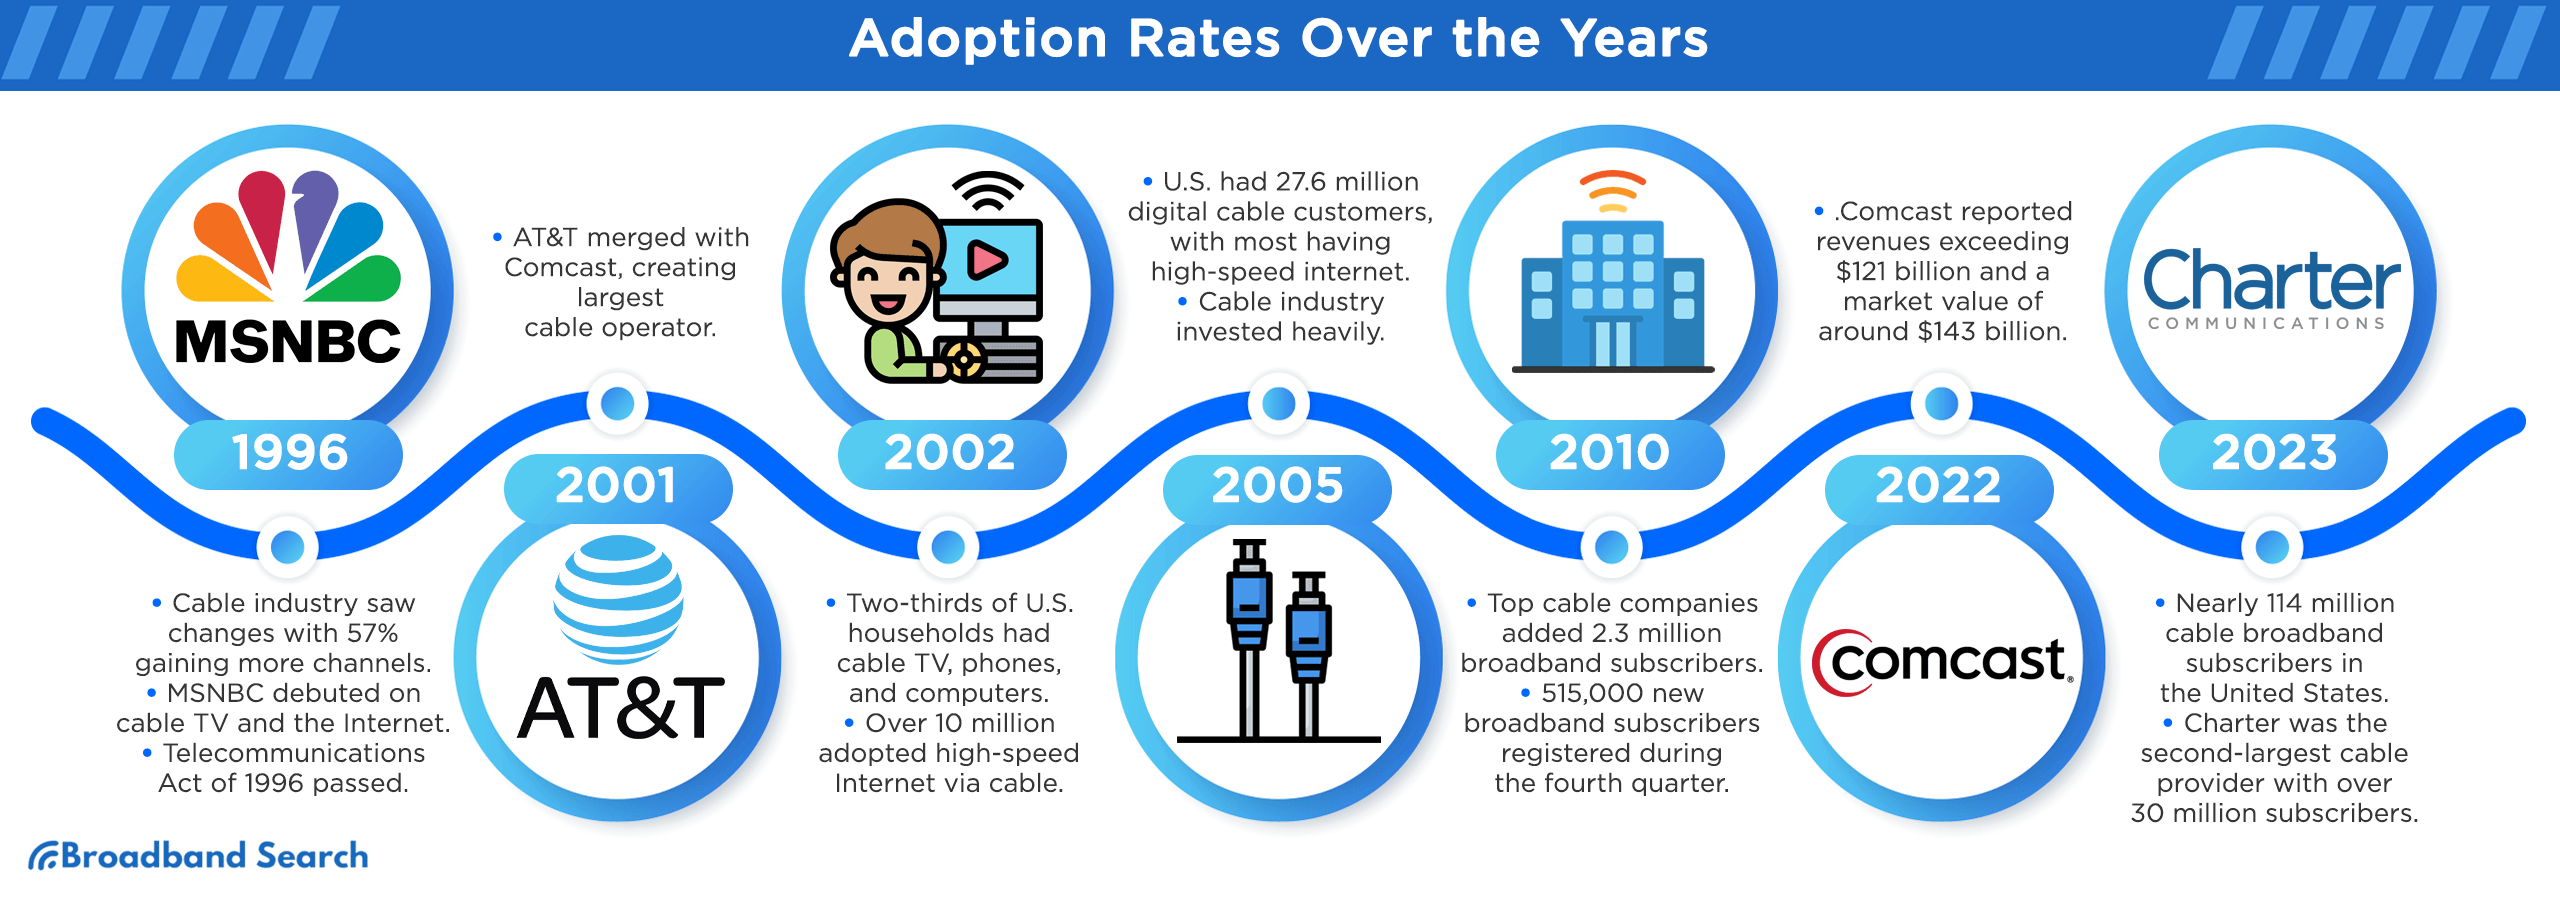 Adoption rate over the years